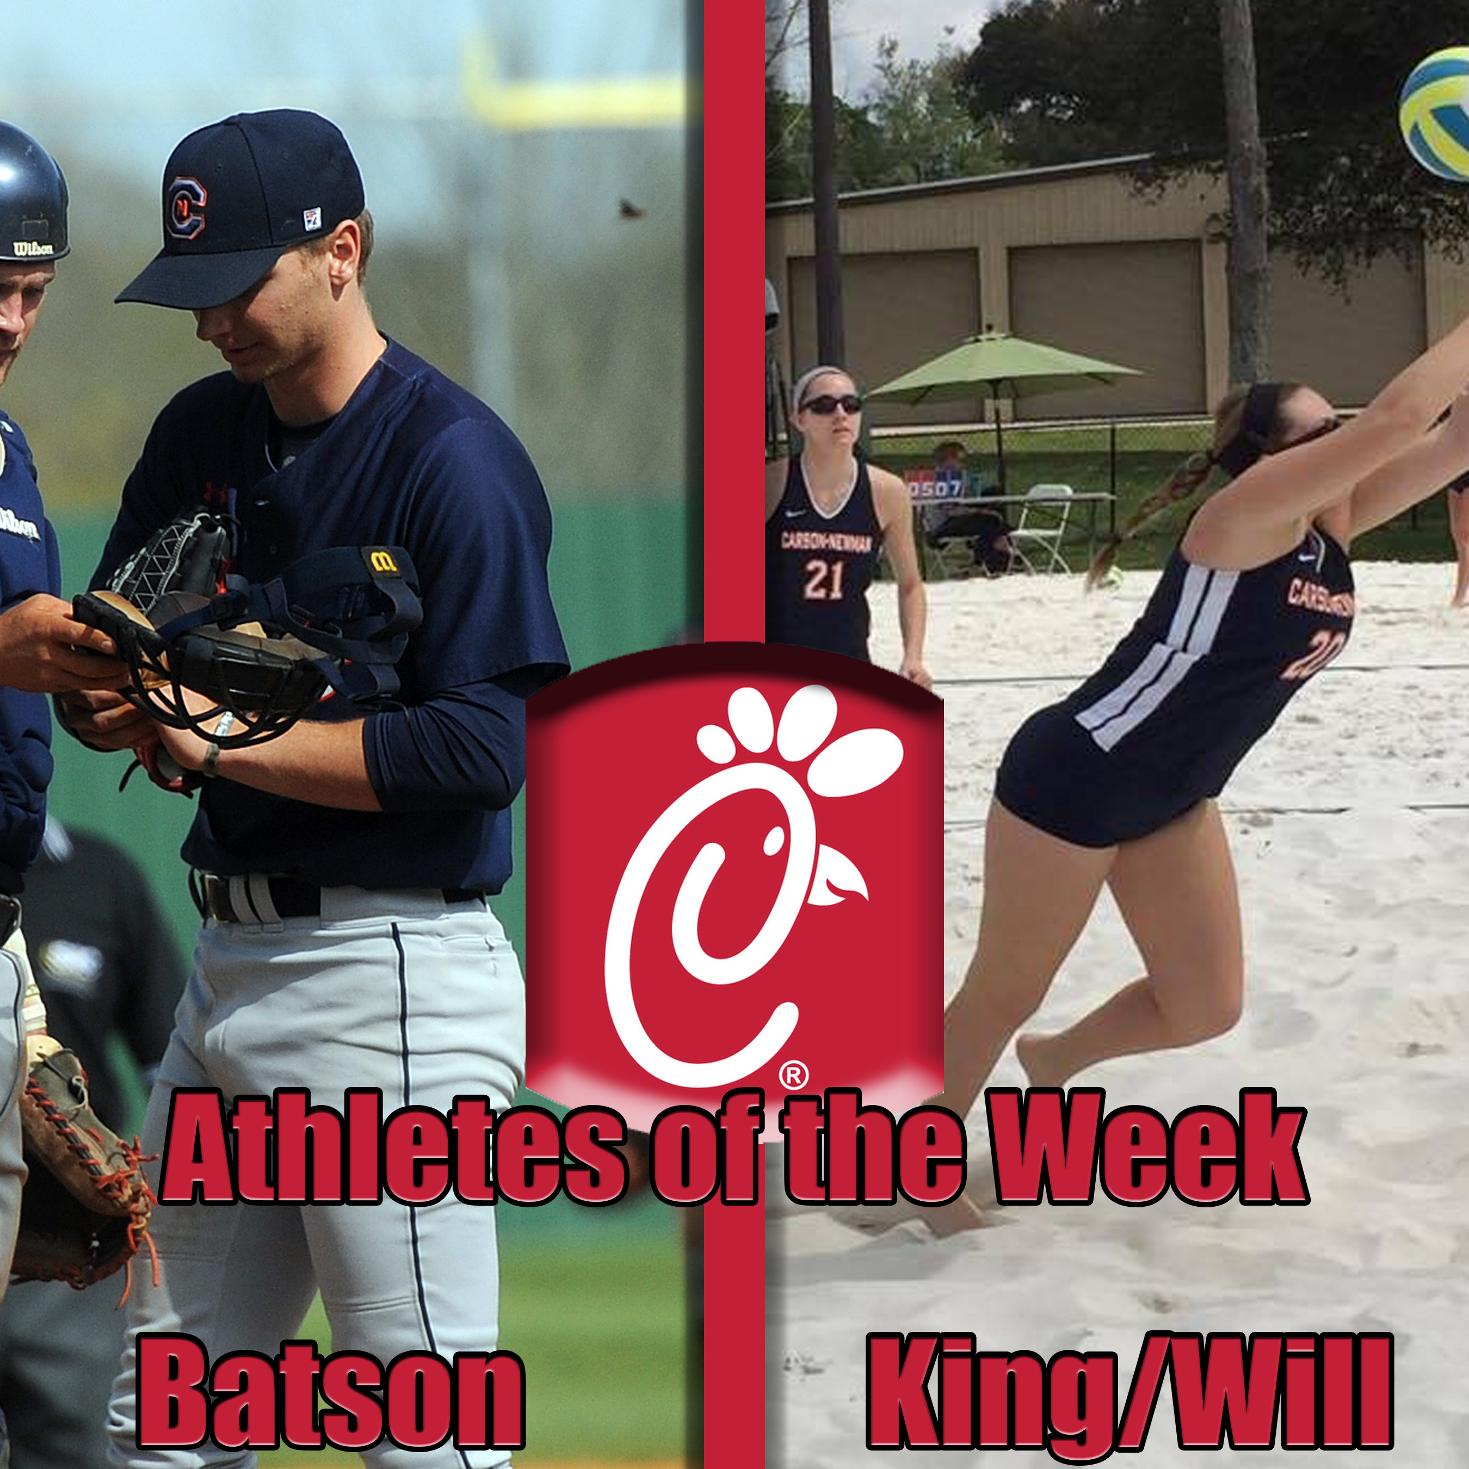 Batson, Beach Volleyball duo bring in Chick-Fil-A Athlete of the Week honors